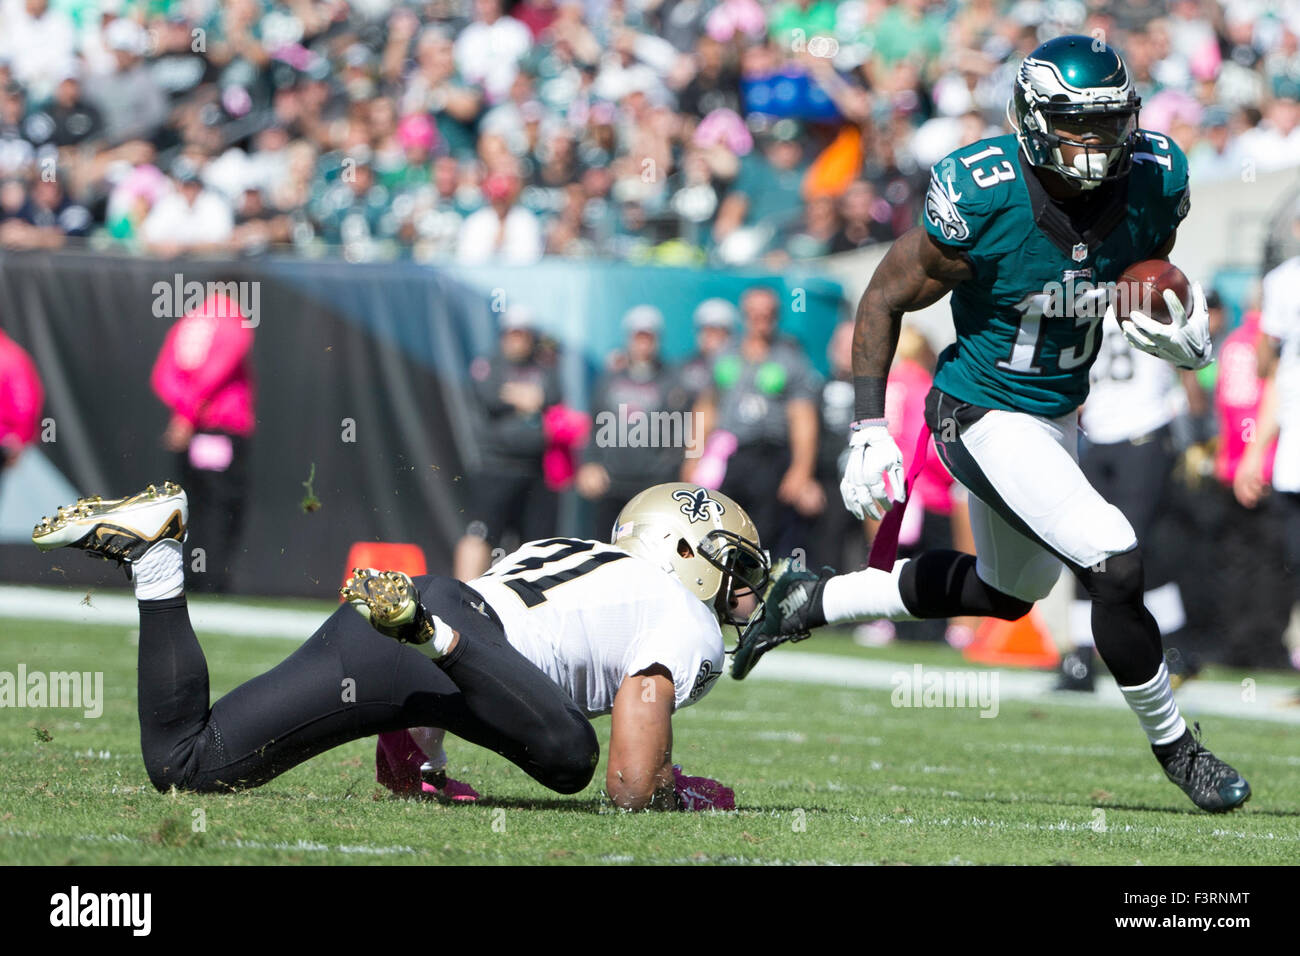 Philadelphia, Pennsylvania, USA. 11th October, 2015. Philadelphia Eagles wide receiver Josh Huff (13) runs with the ball past New Orleans Saints free safety Jairus Byrd (31) during the NFL game between the New Orleans Saints and the Philadelphia Eagles at Lincoln Financial Field in Philadelphia, Pennsylvania. The Philadelphia Eagles won 39-17. Credit:  Cal Sport Media/Alamy Live News Stock Photo